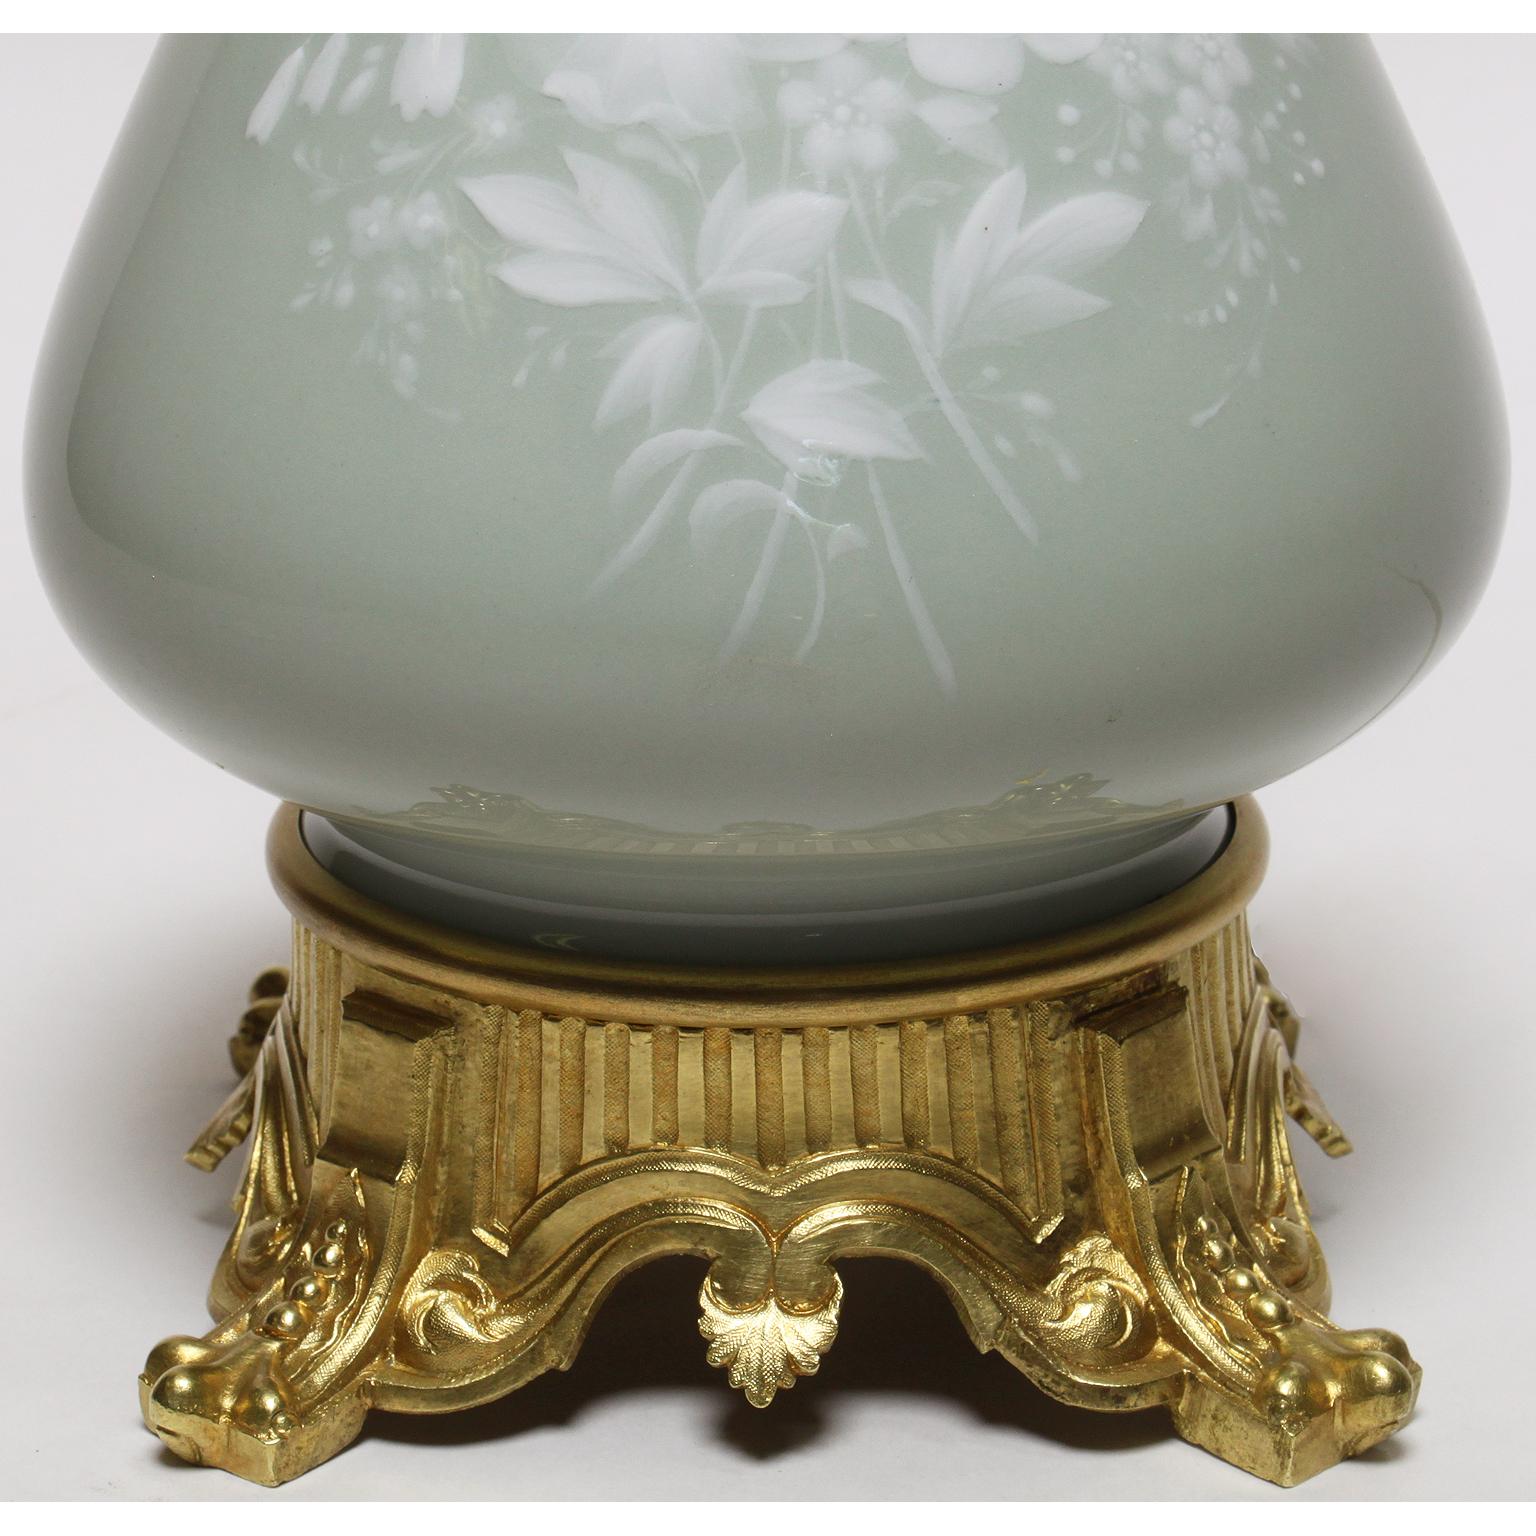 Fine French 19th-20th Century Pâte-sur-Pâte Porcelain and Gilt-Bronze Table Lamp In Good Condition For Sale In Los Angeles, CA